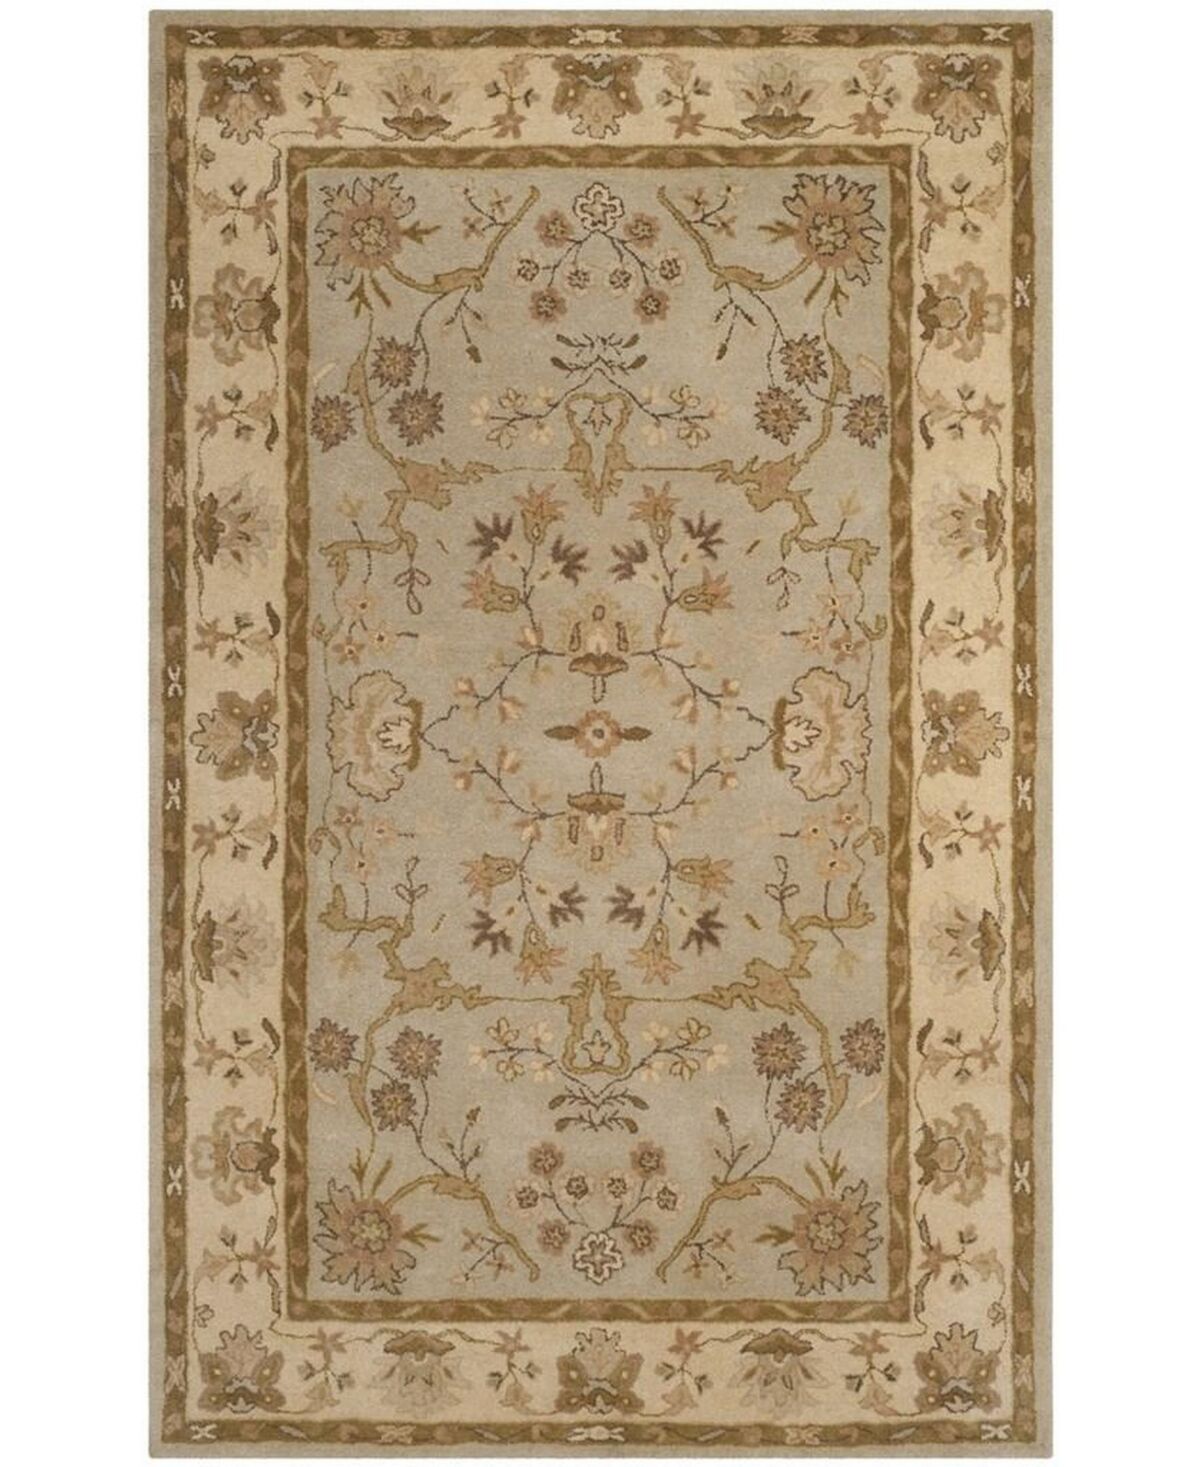 Safavieh Antiquity At62 Silver 5' x 8' Area Rug - Silver